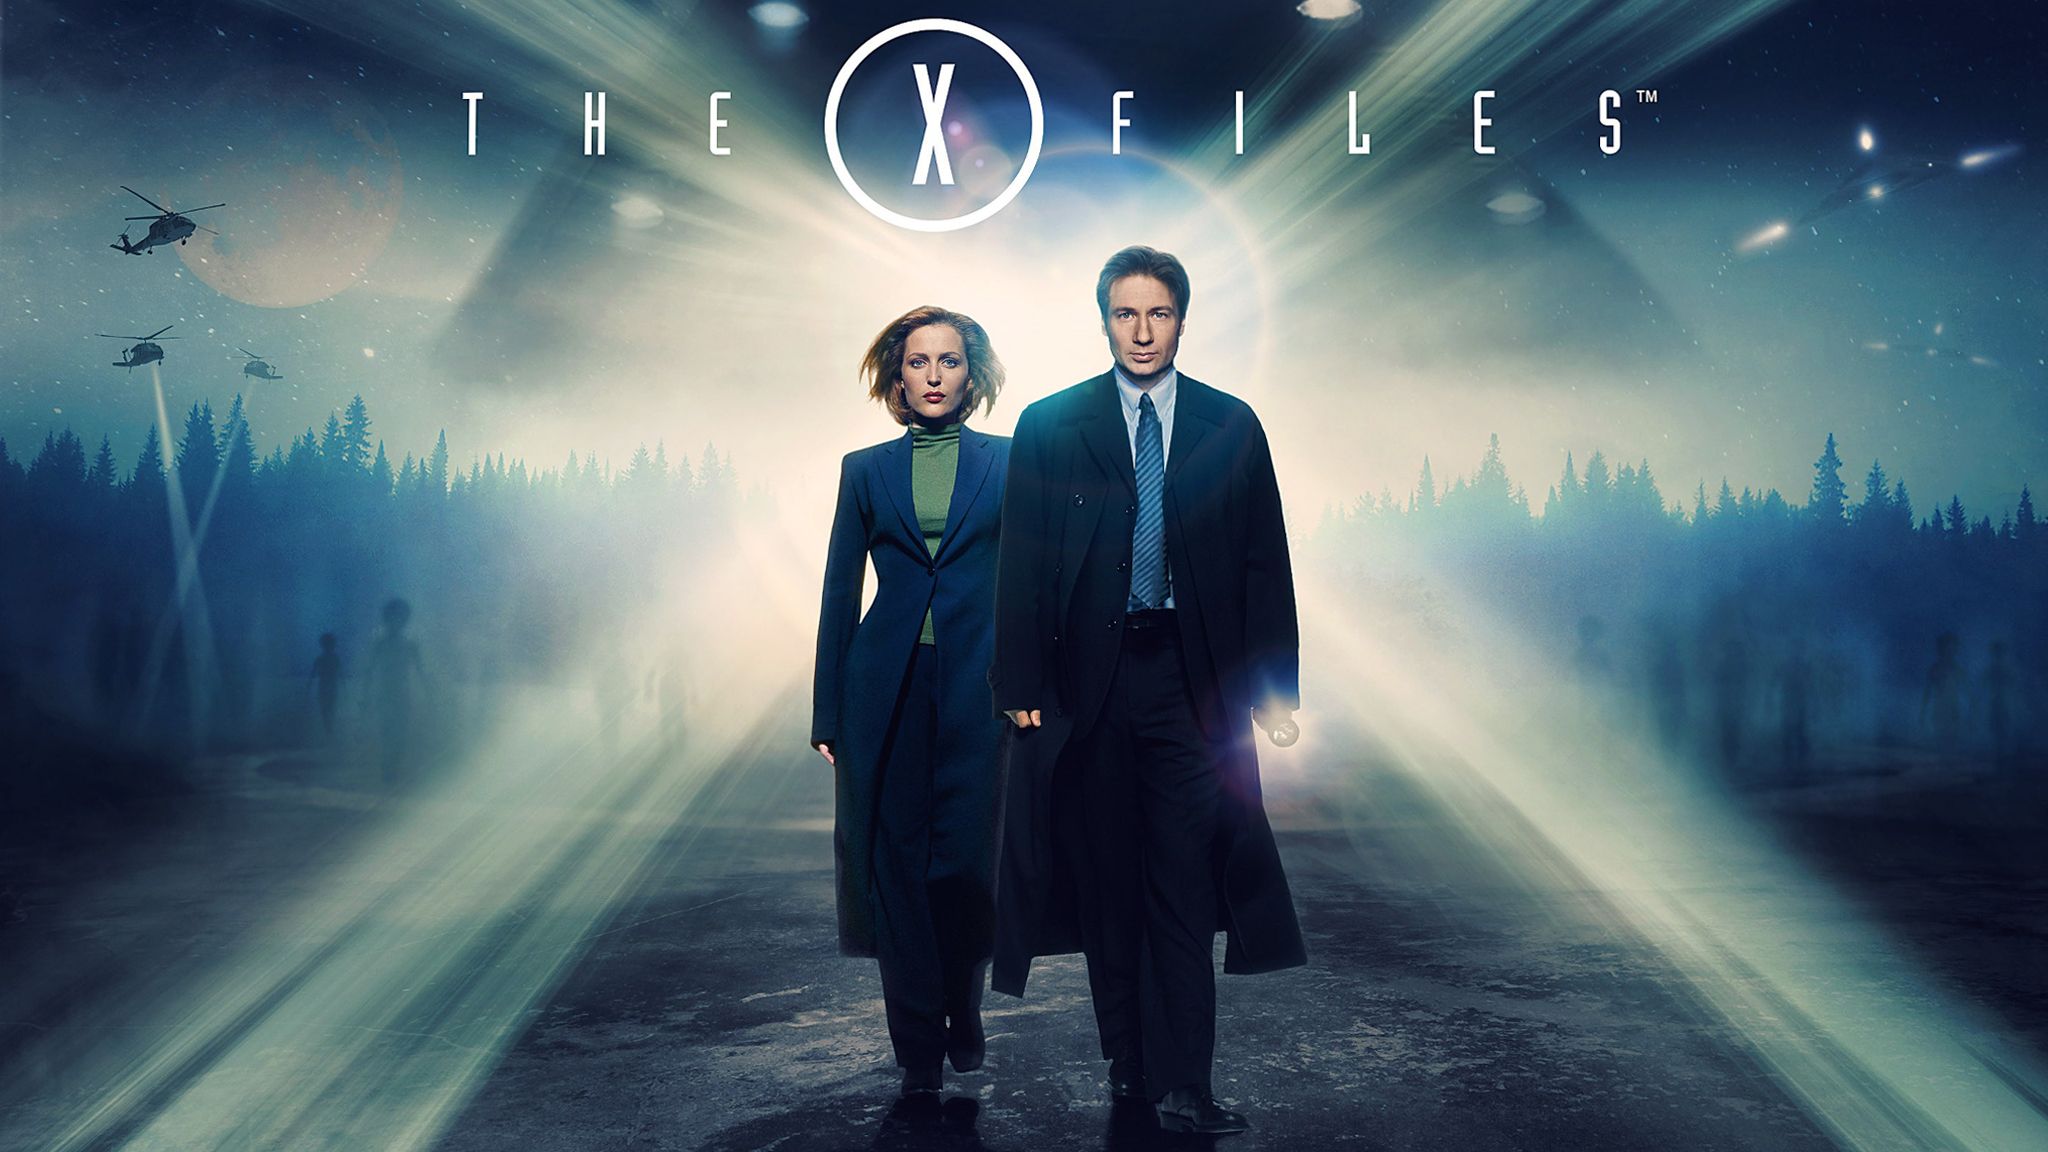 fox-is-now-streaming-the-entire-series-of-the-x-files-for-free-and